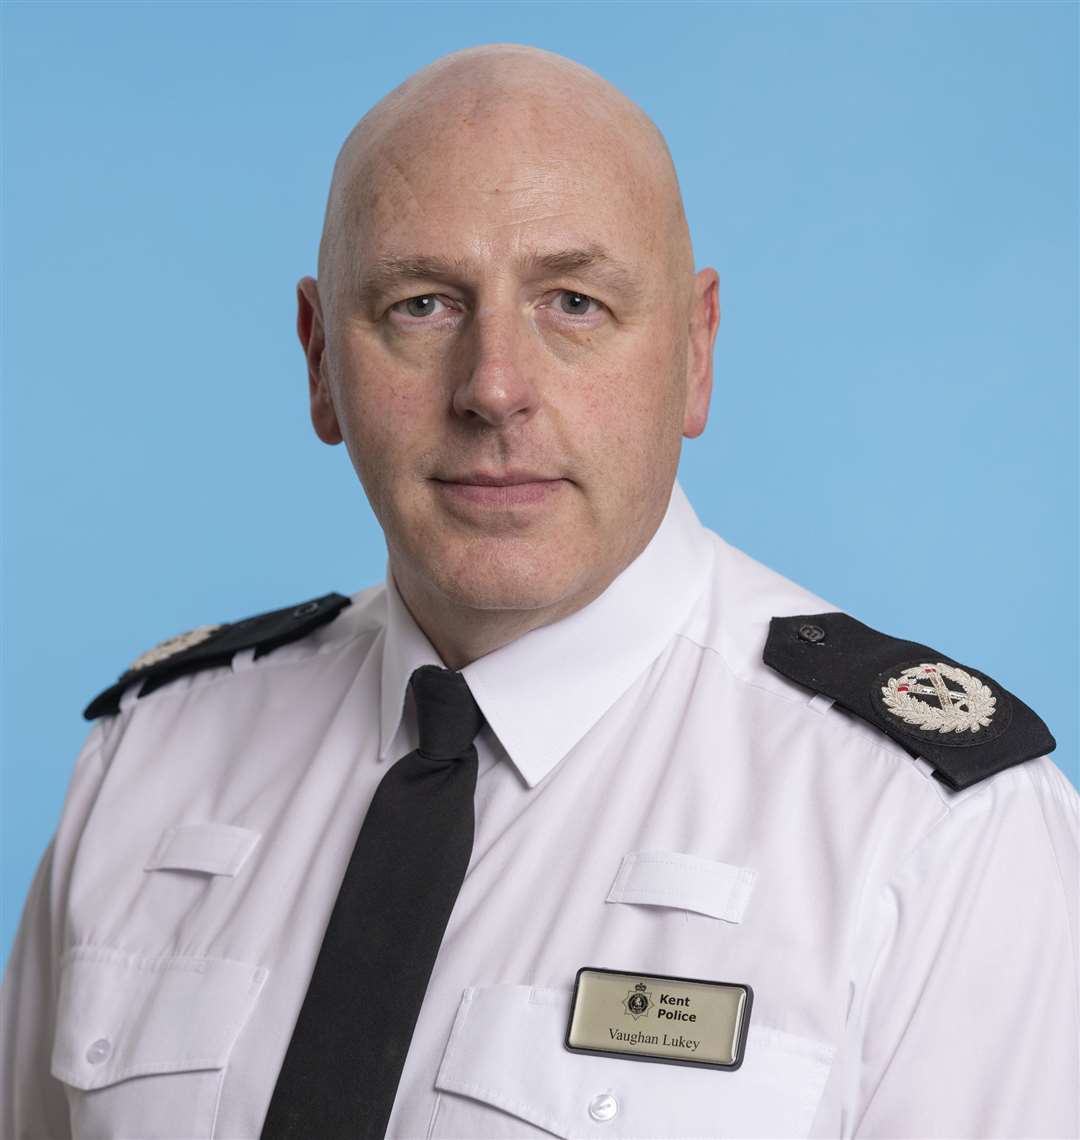 Temporary Assistant Chief Constable Vaughan Lukey